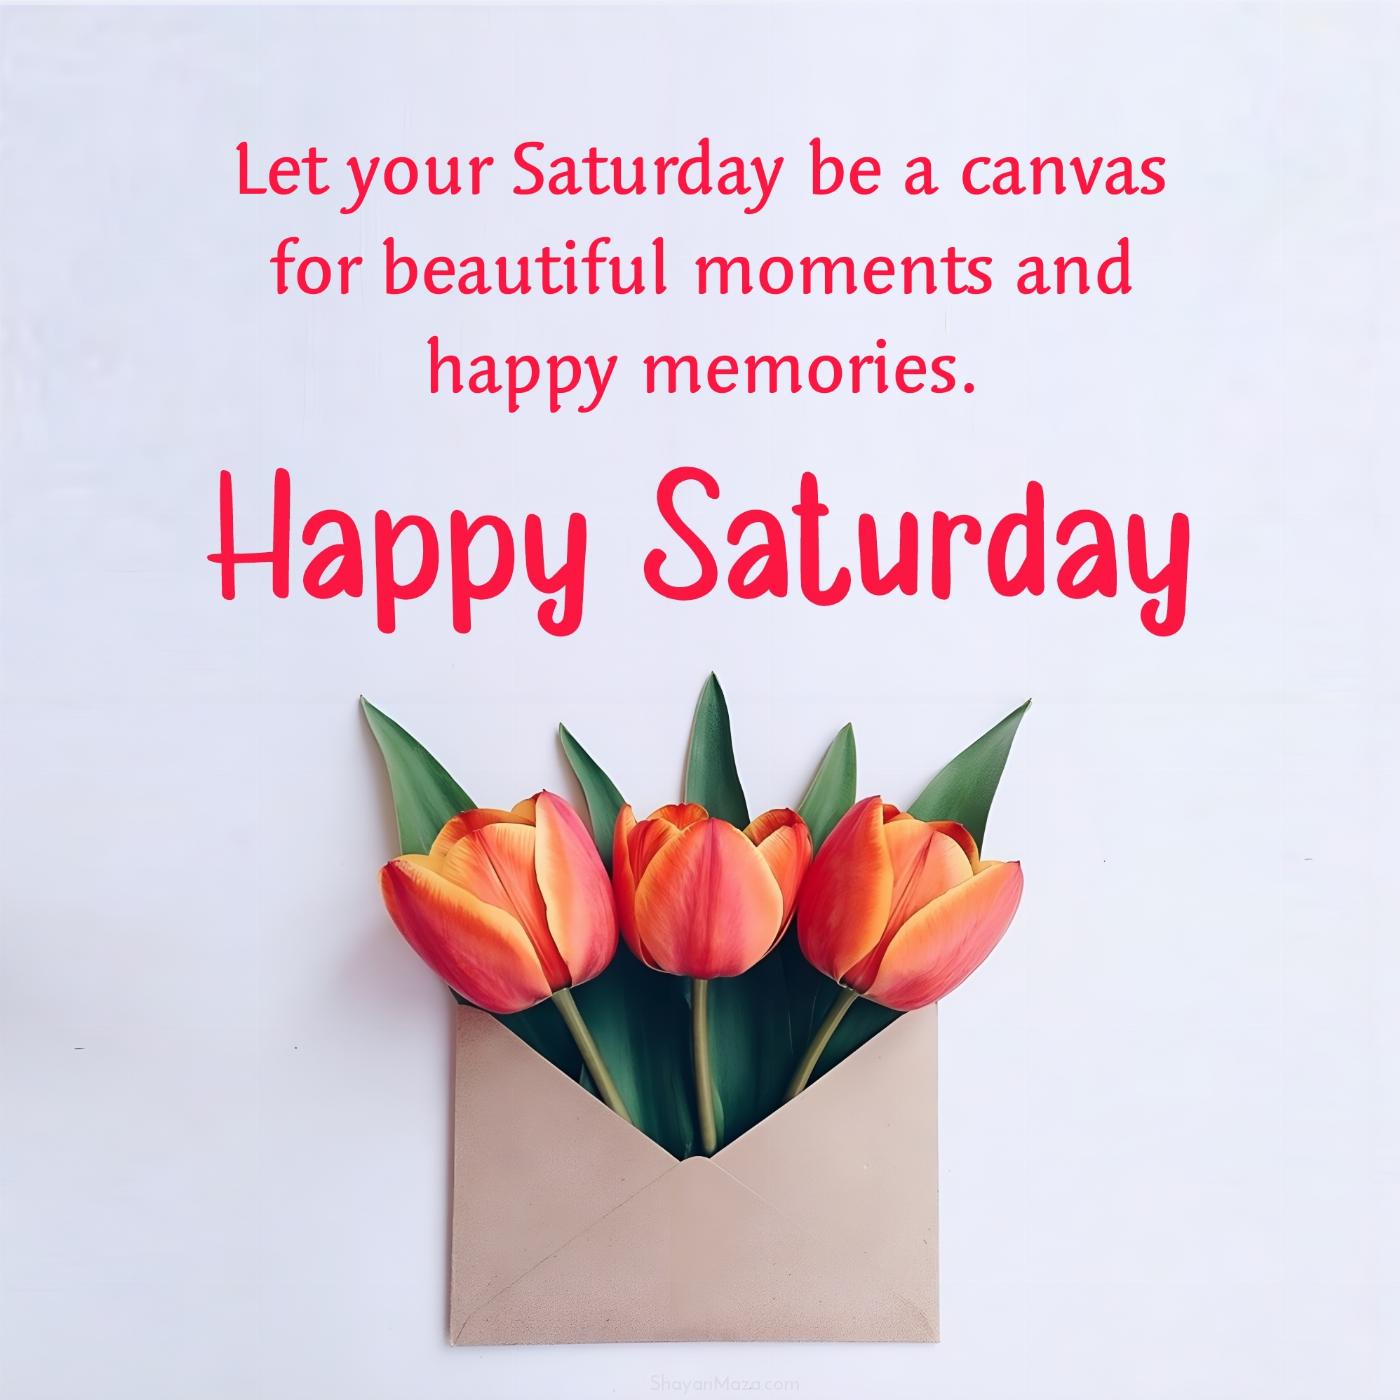 Let your Saturday be a canvas for beautiful moments